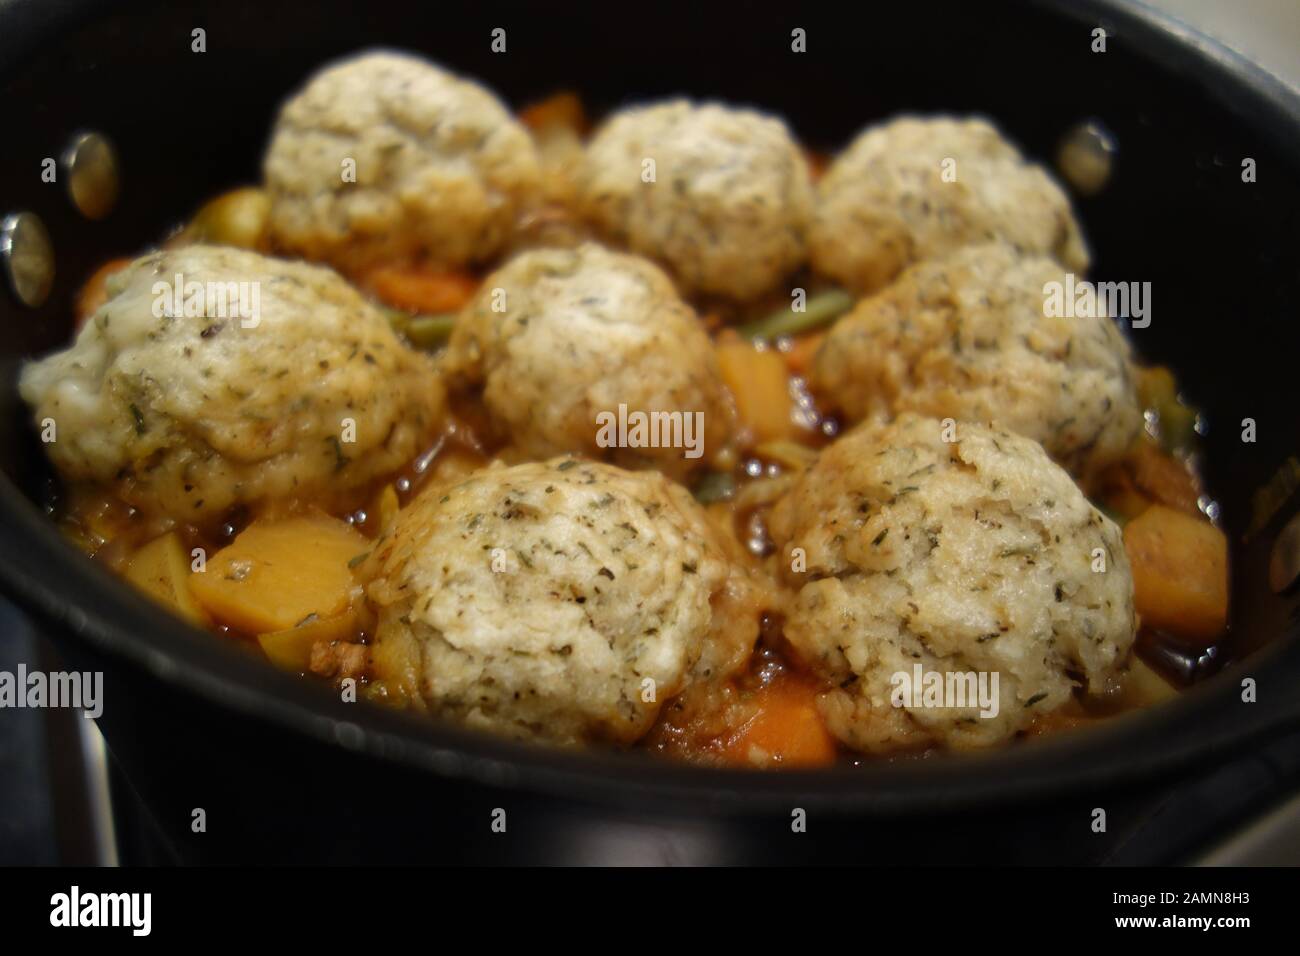 Large Black Pan Of Homemade Vegetable Broth Eight Herby Dumplings Cooking On A Gas Hob Stock Photo Alamy